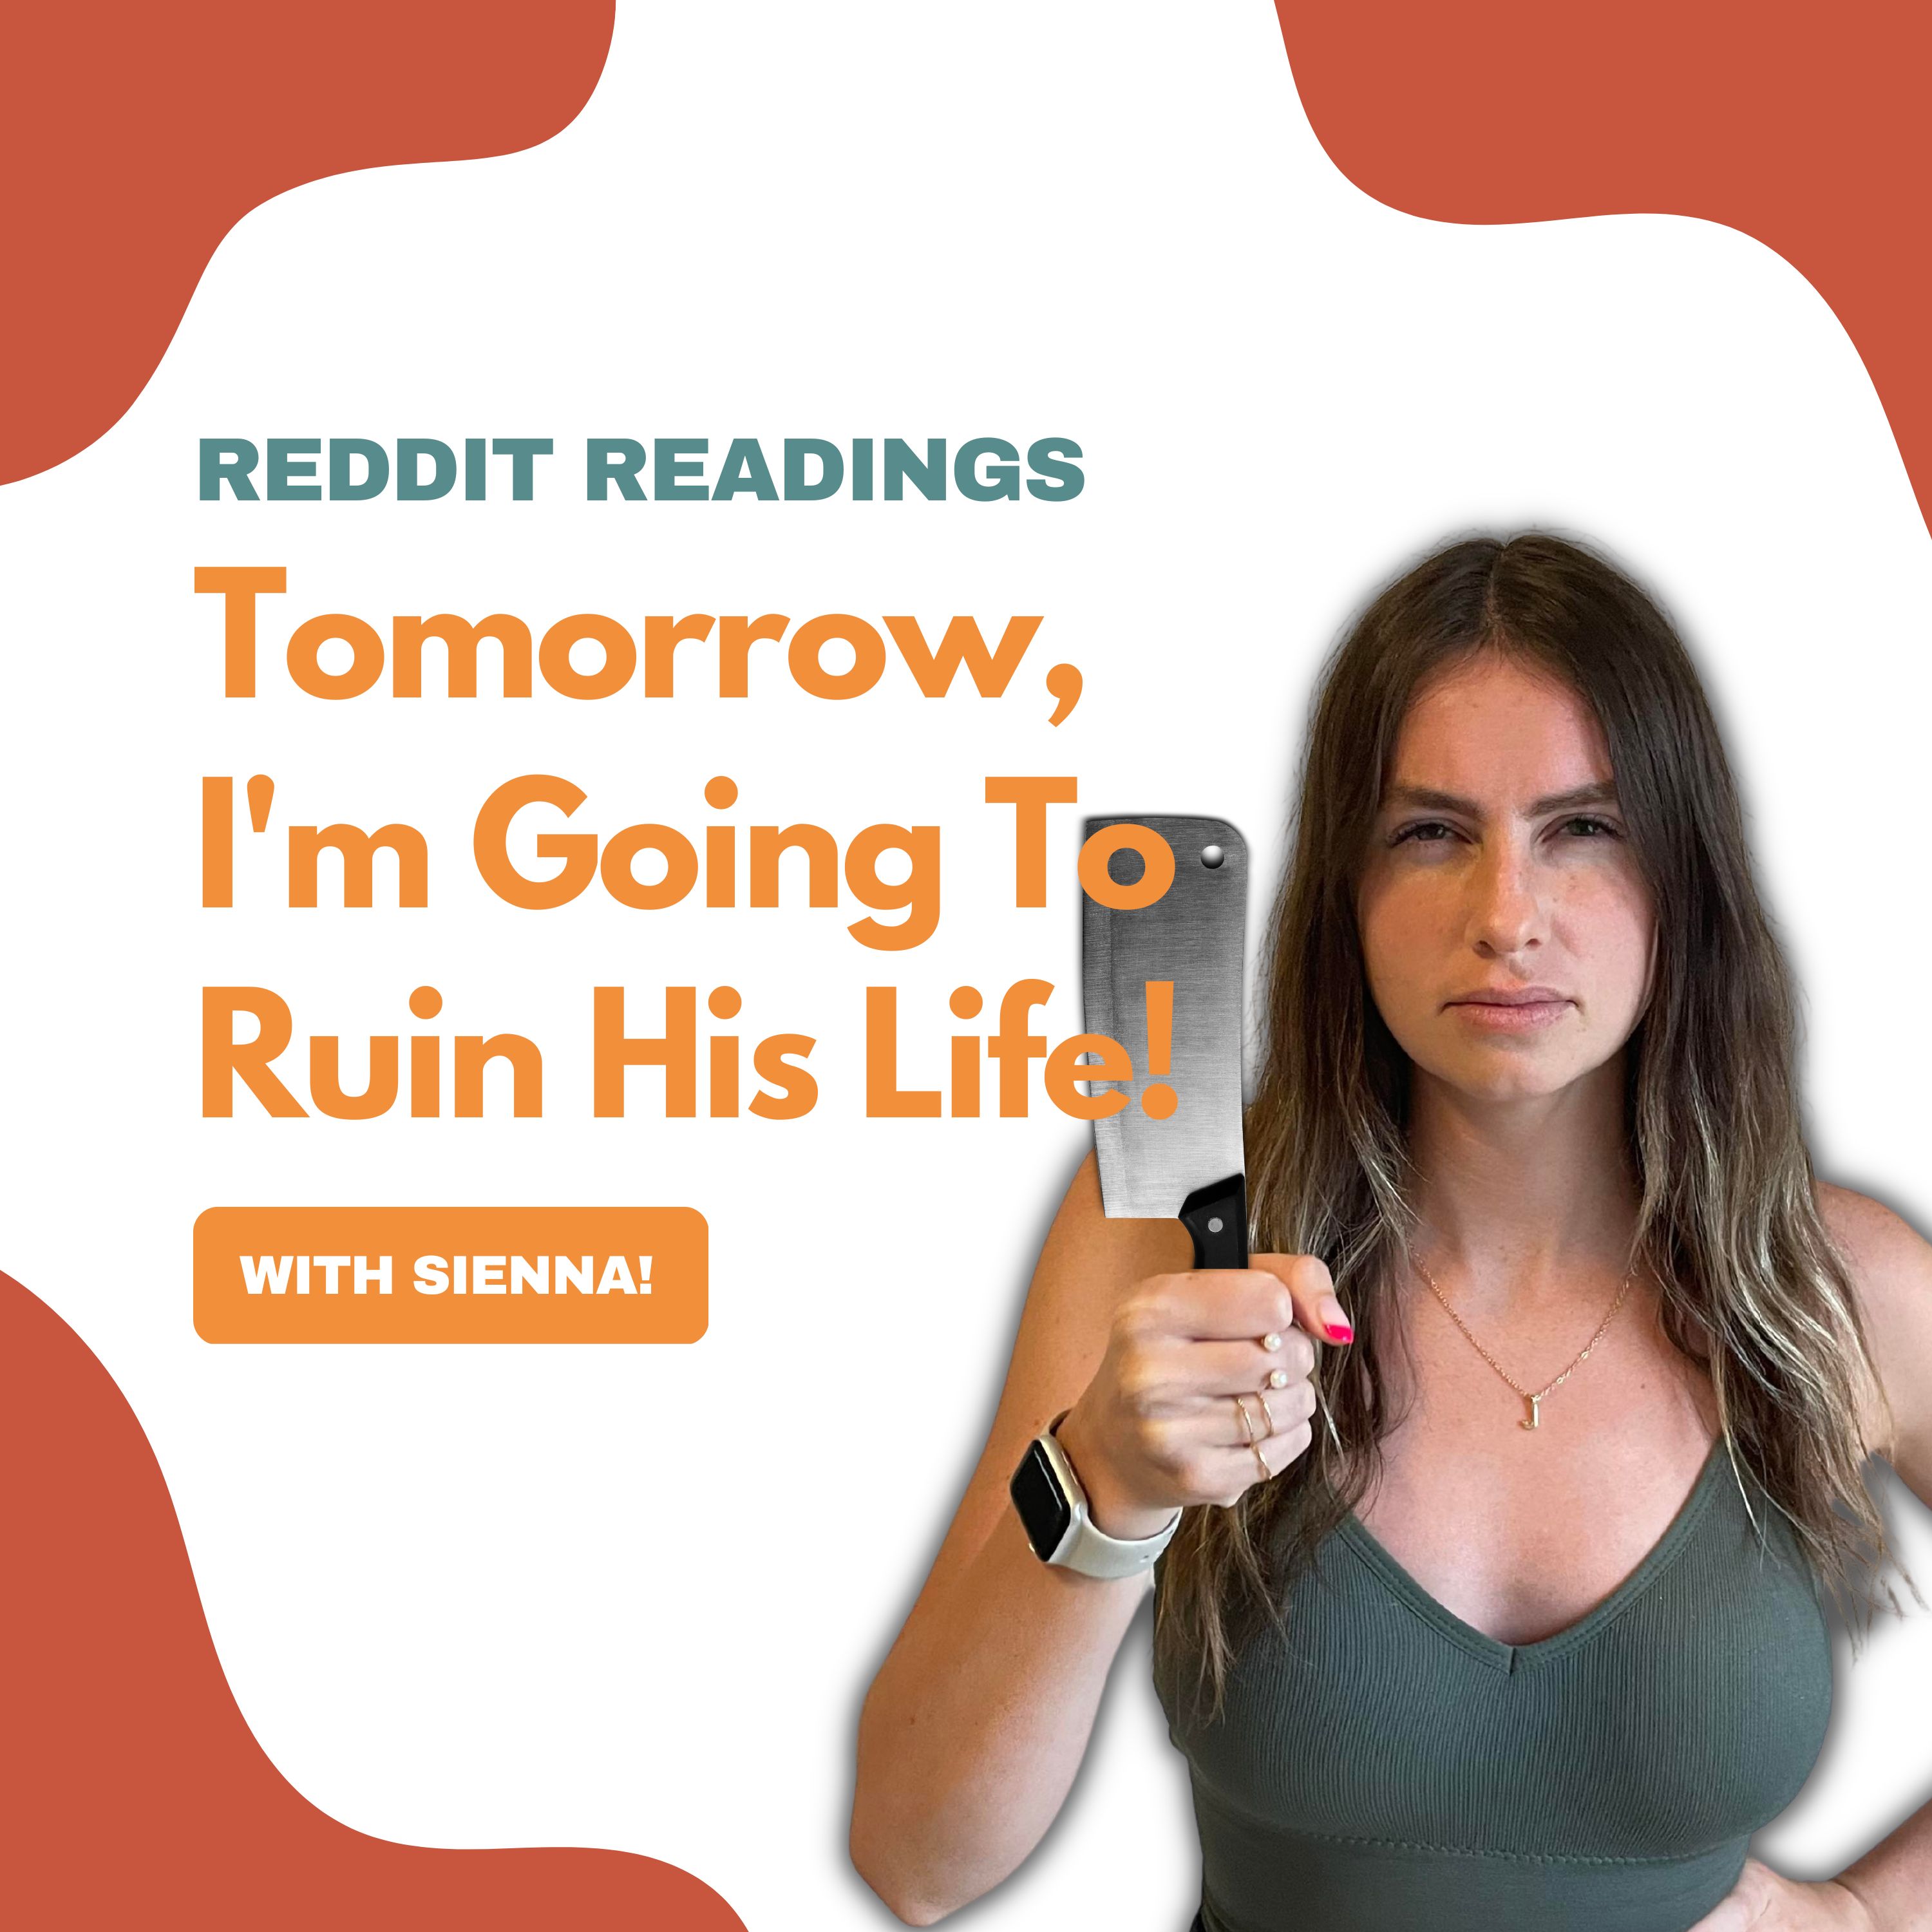 Reddit Readings | Tomorrow, I'm Going To Ruin His Life!